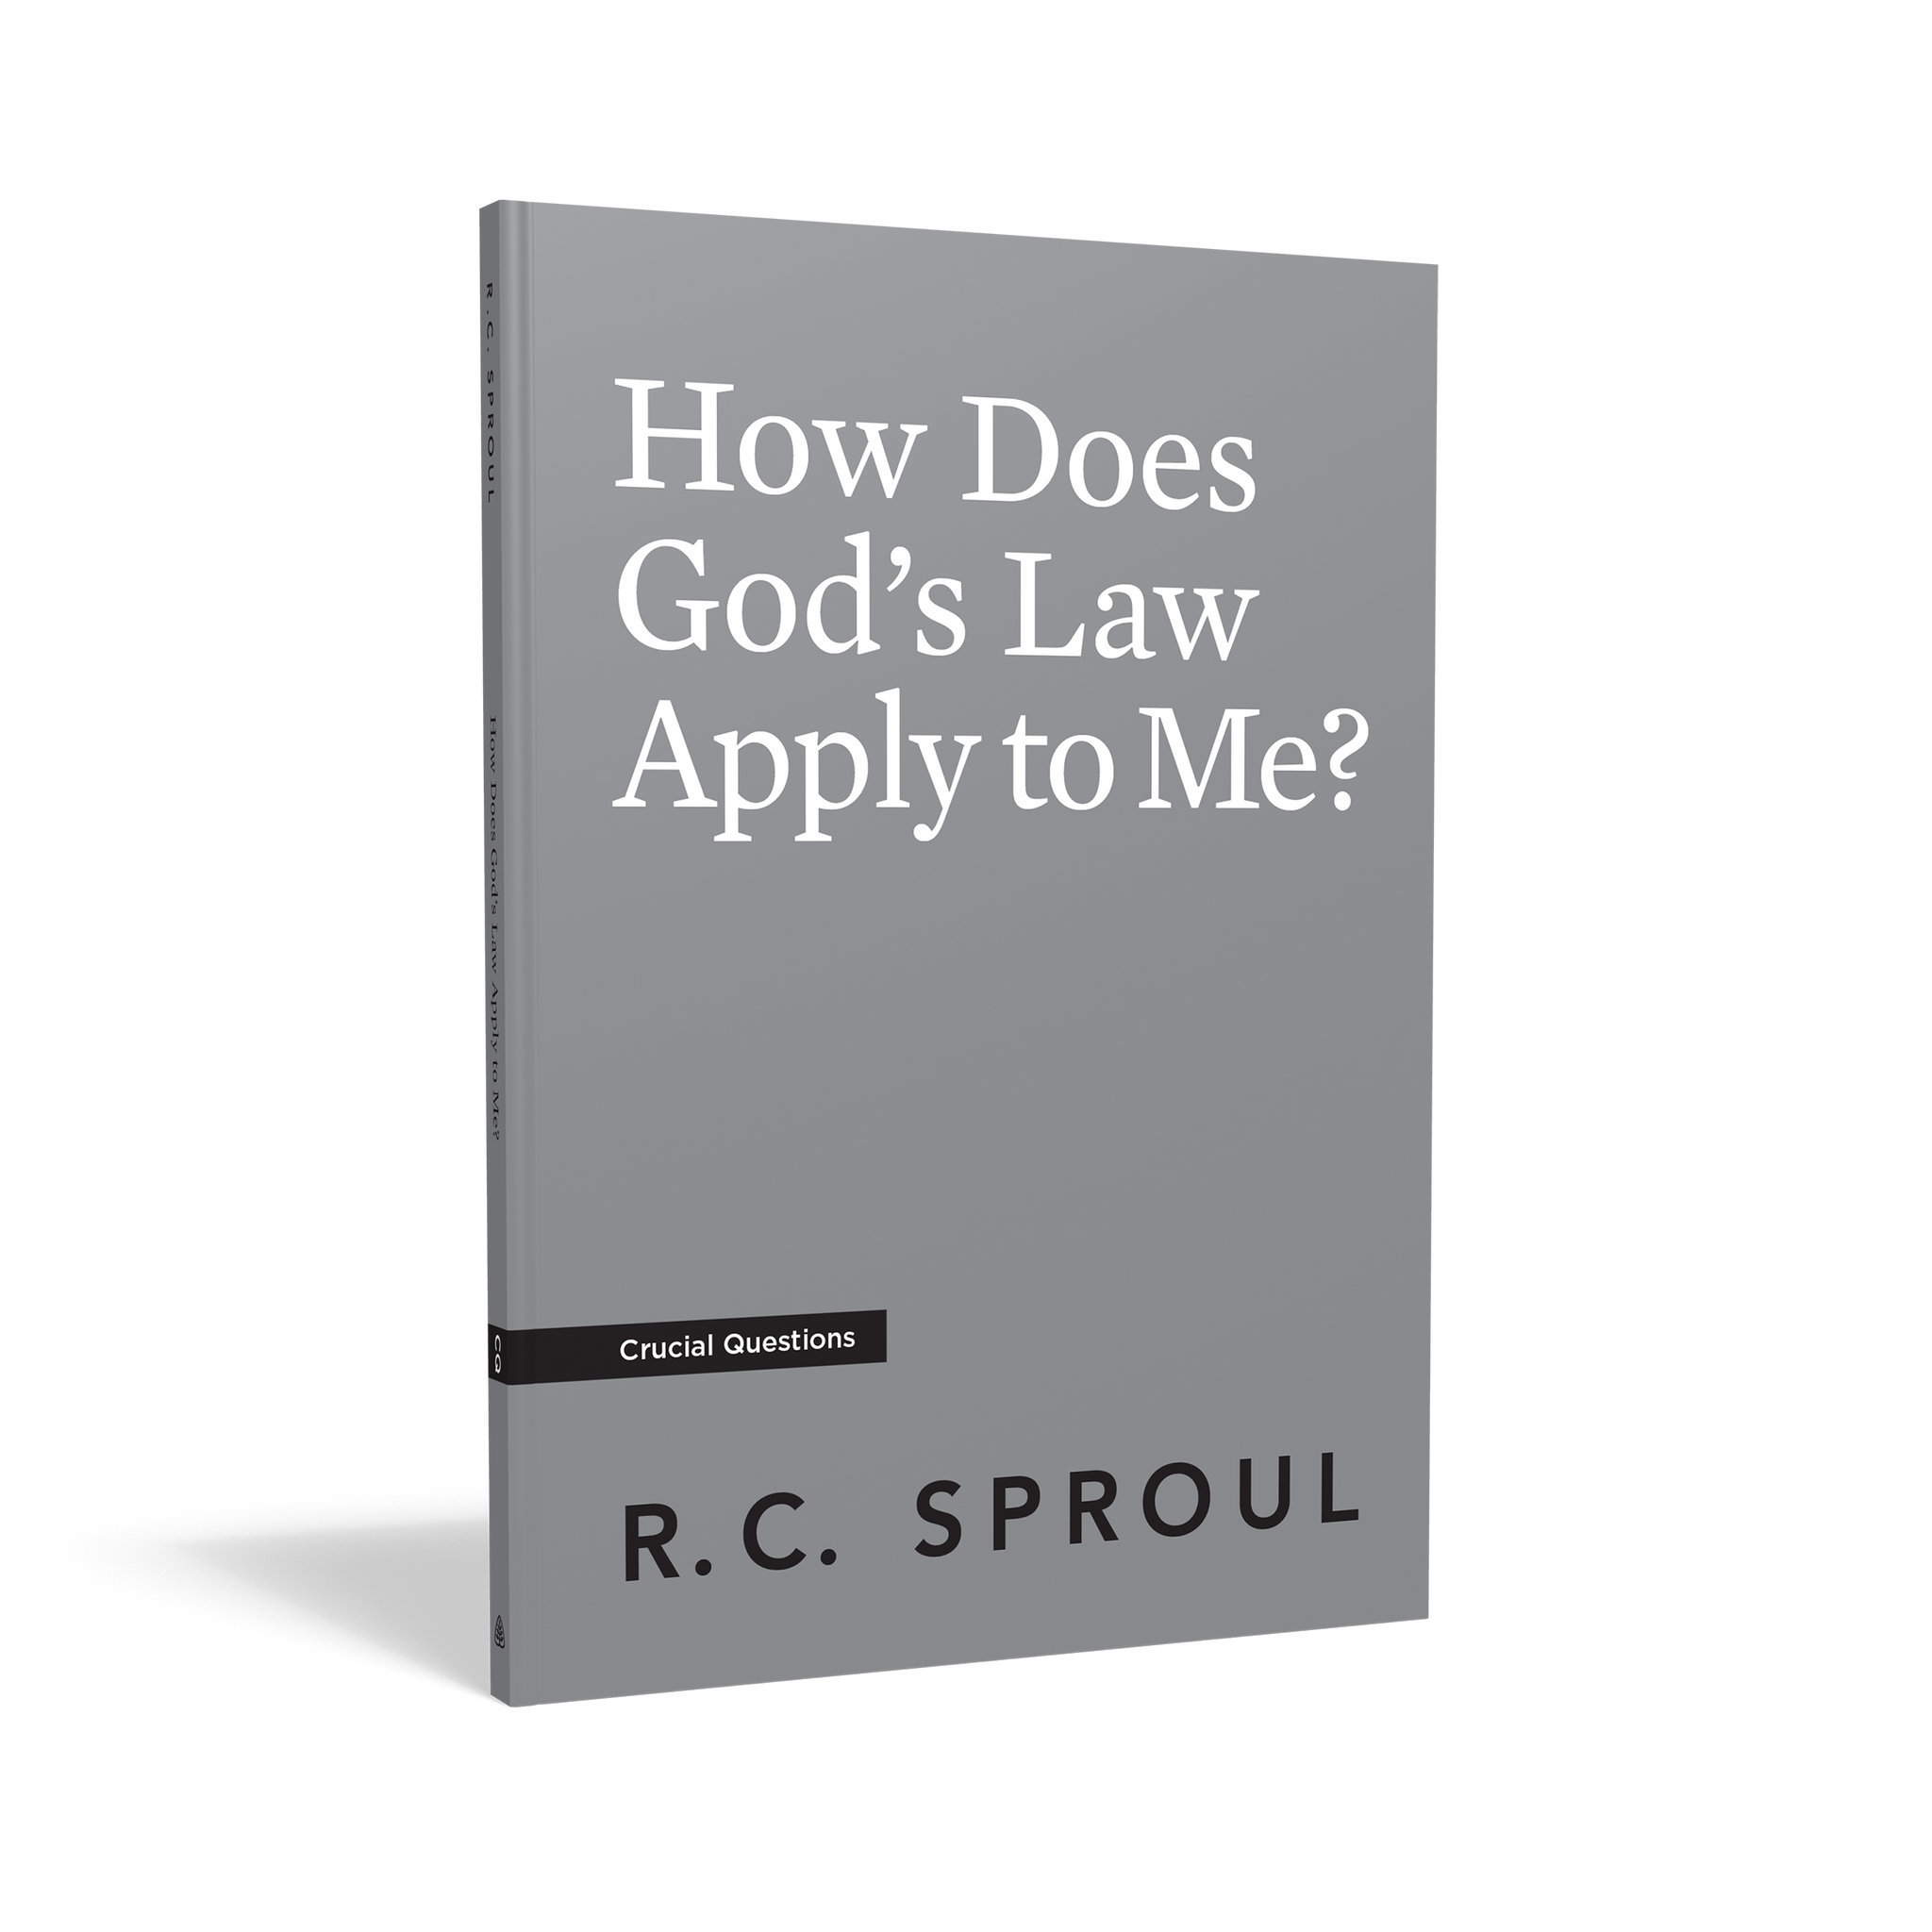 Crucial Questions - How Does God's Law Apply to Me?